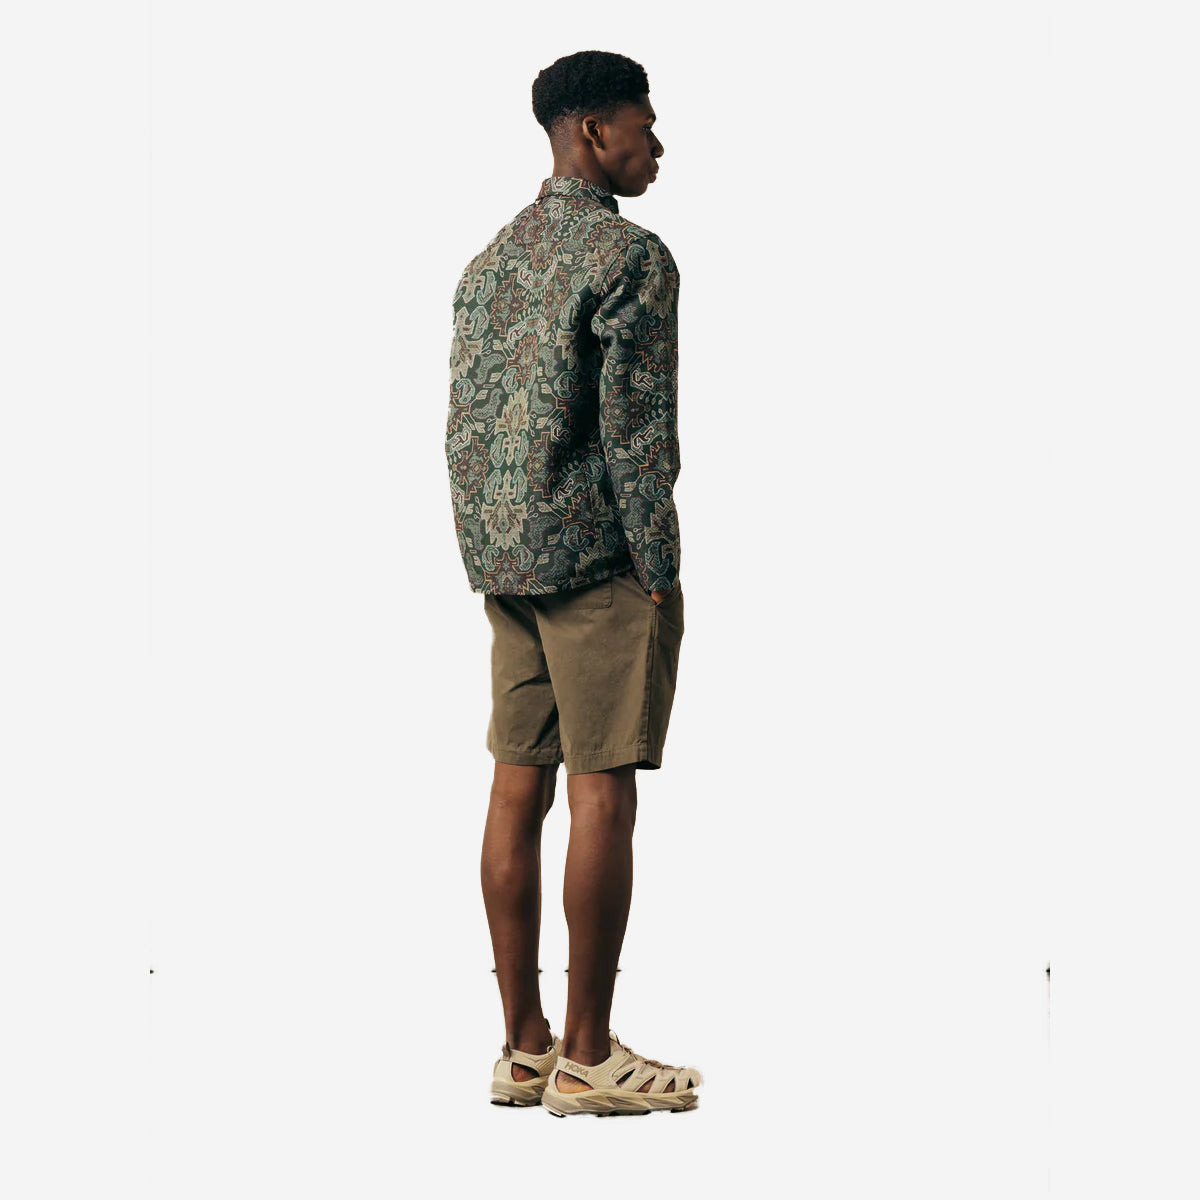 Inverness Cotton Twill Easy Shorts - Olive